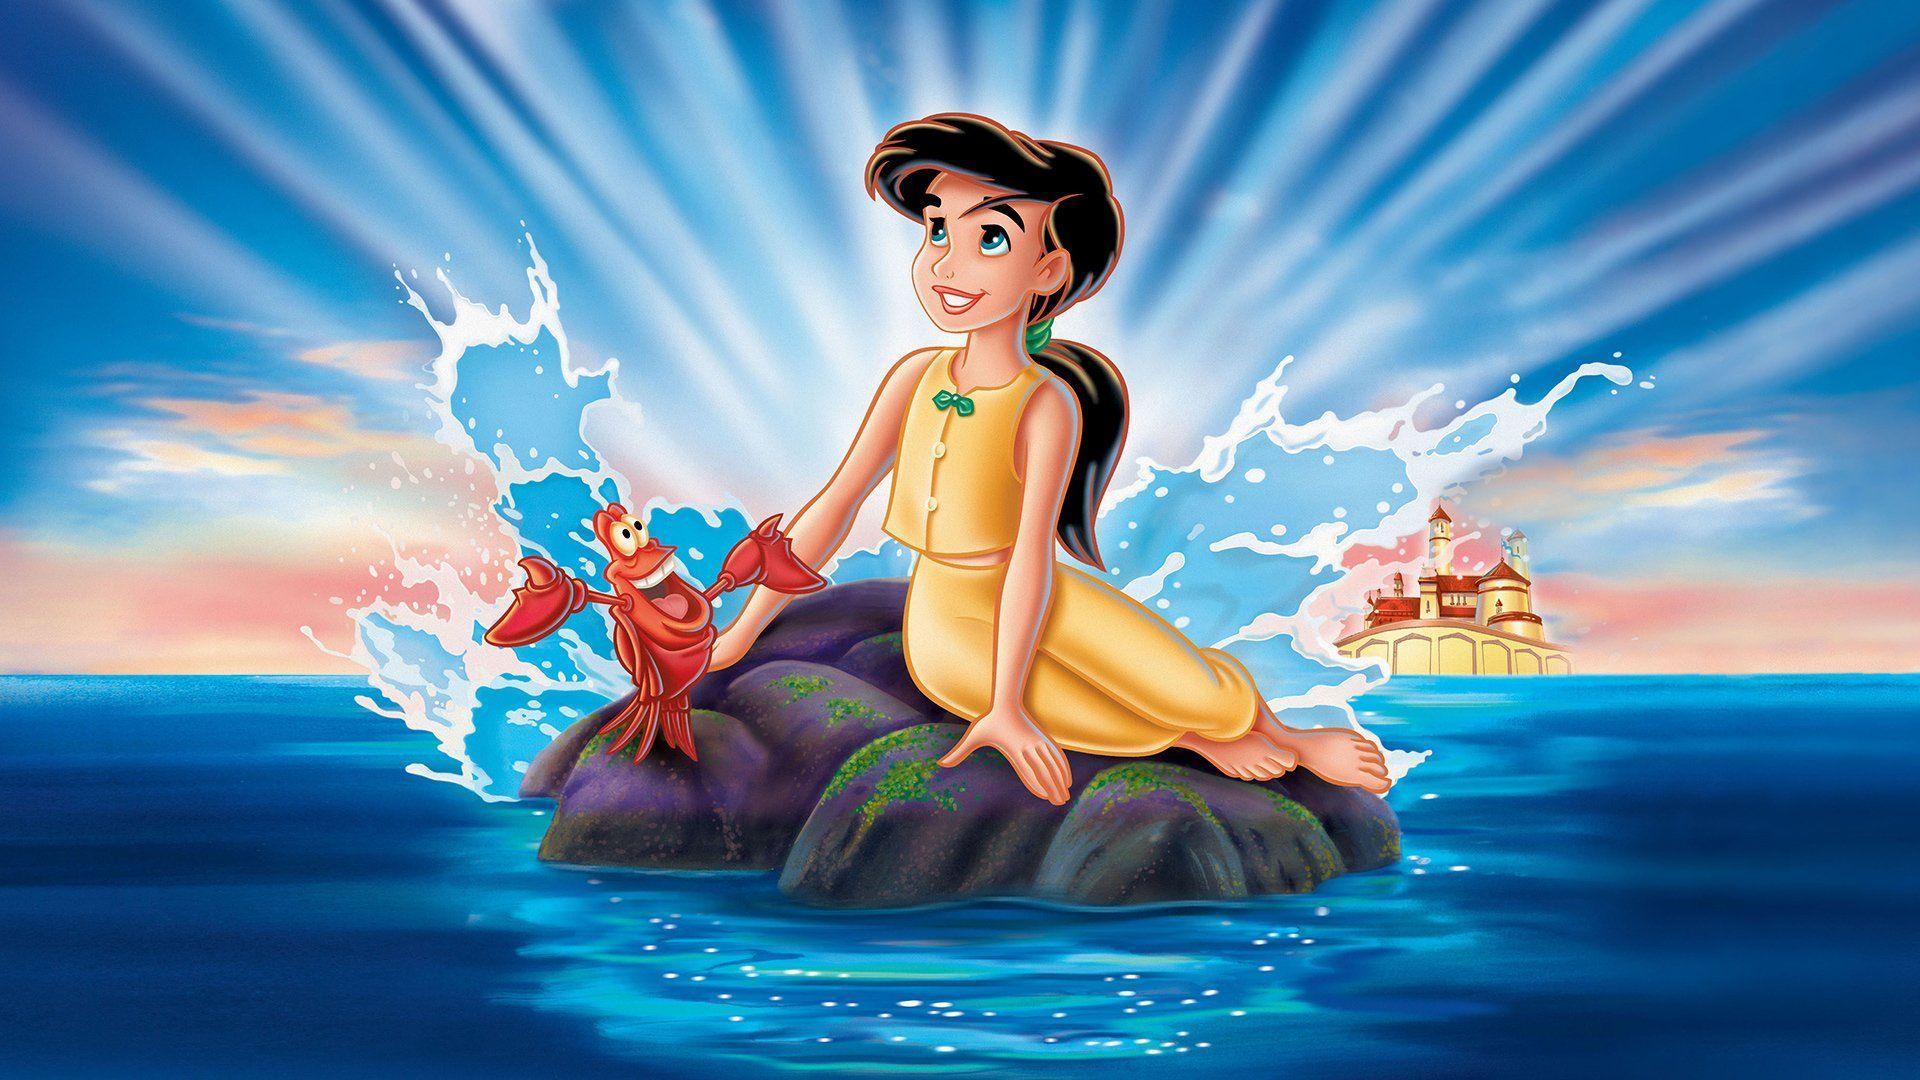 The Little Mermaid 2 Wallpapers - Top Free The Little Mermaid 2 Backgrounds  - WallpaperAccess